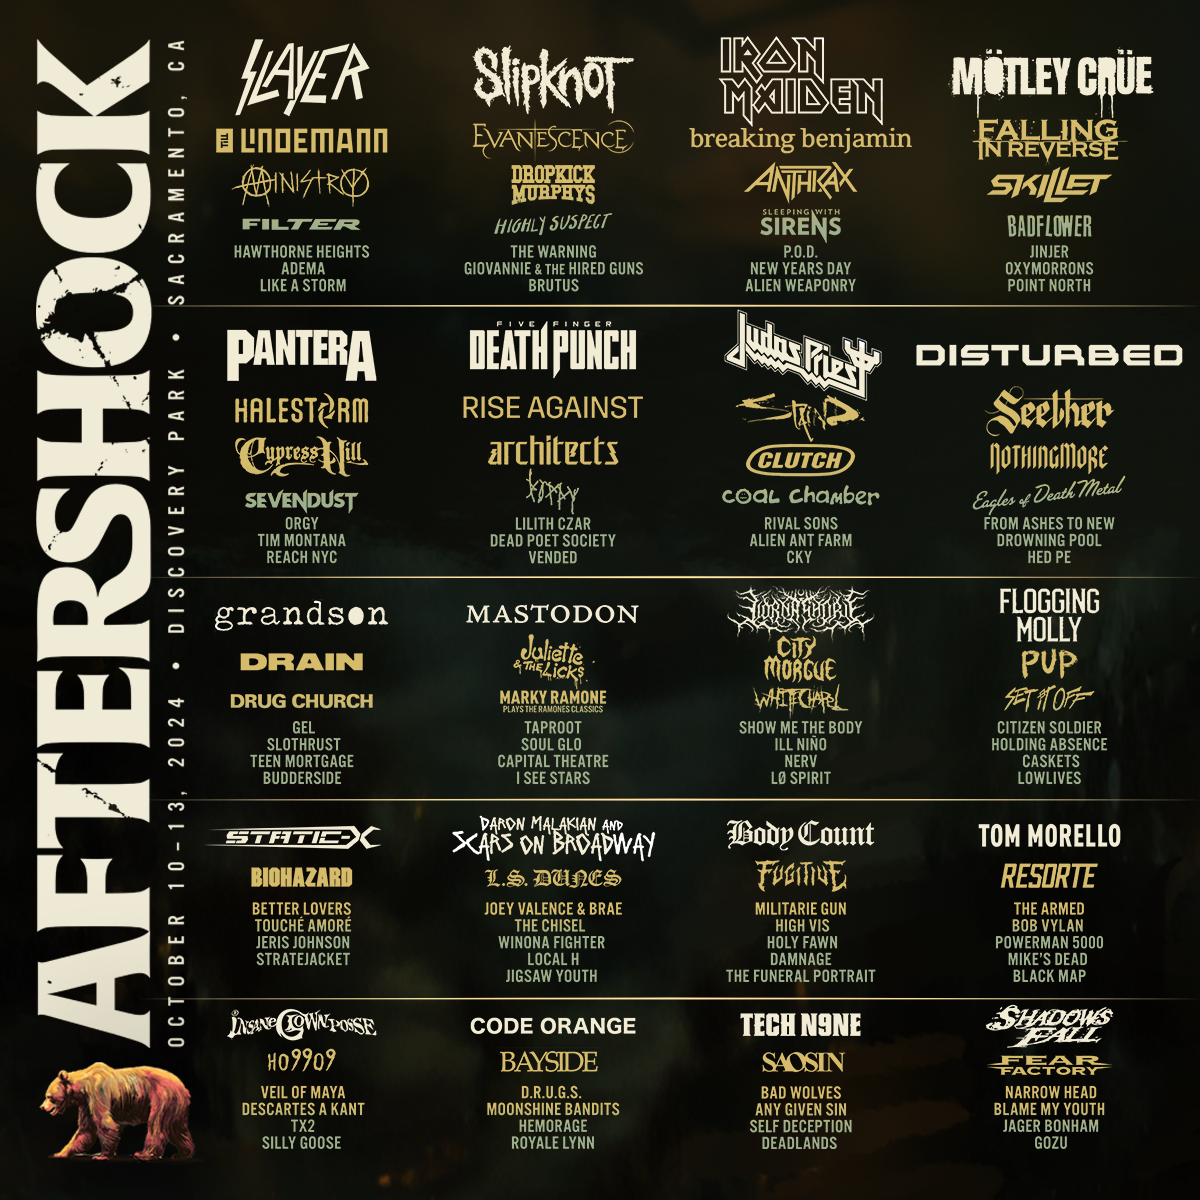 Disturbed at Aftershock Fest in Sacramento on Oct 13